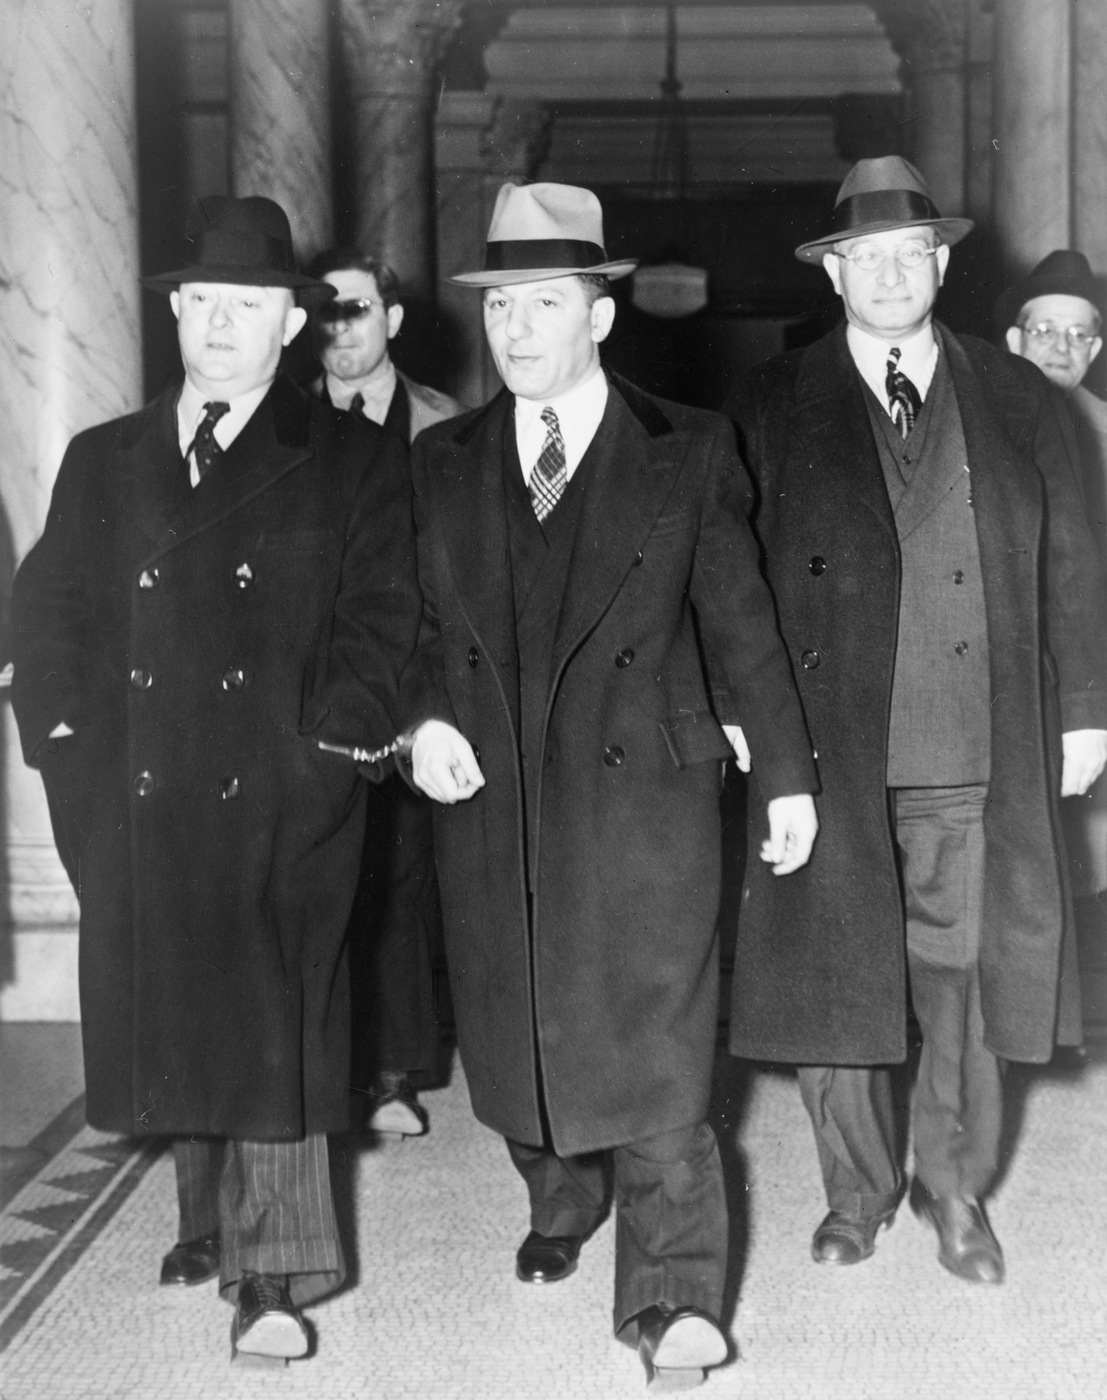 Mobster Louis "Lepke" Buchalter (center) is escorted from a courthouse in 1940. Library of Congress photograph.